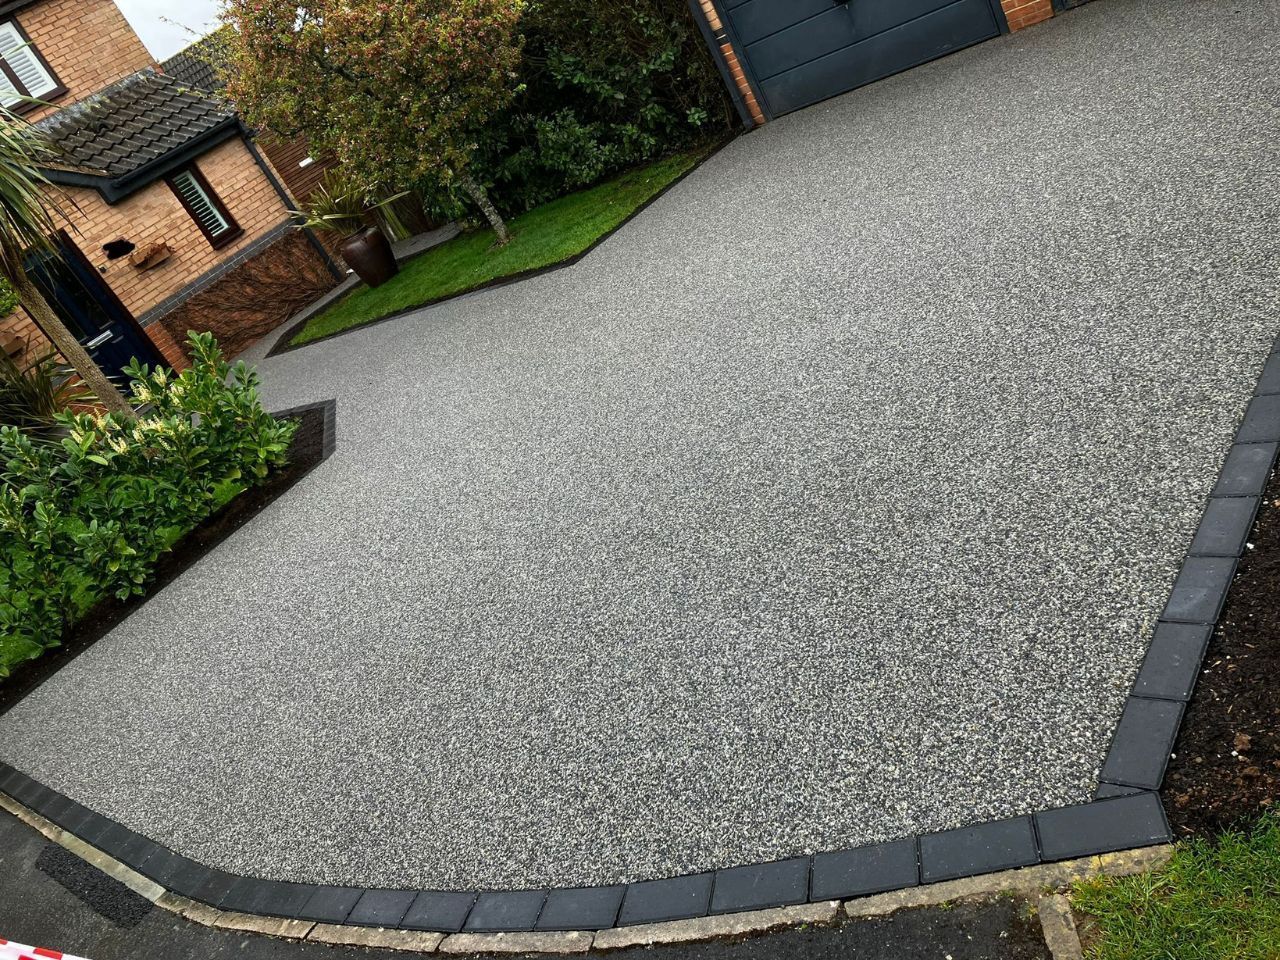 Resin driveway finished in a grey colour, with a green garden full of plants.